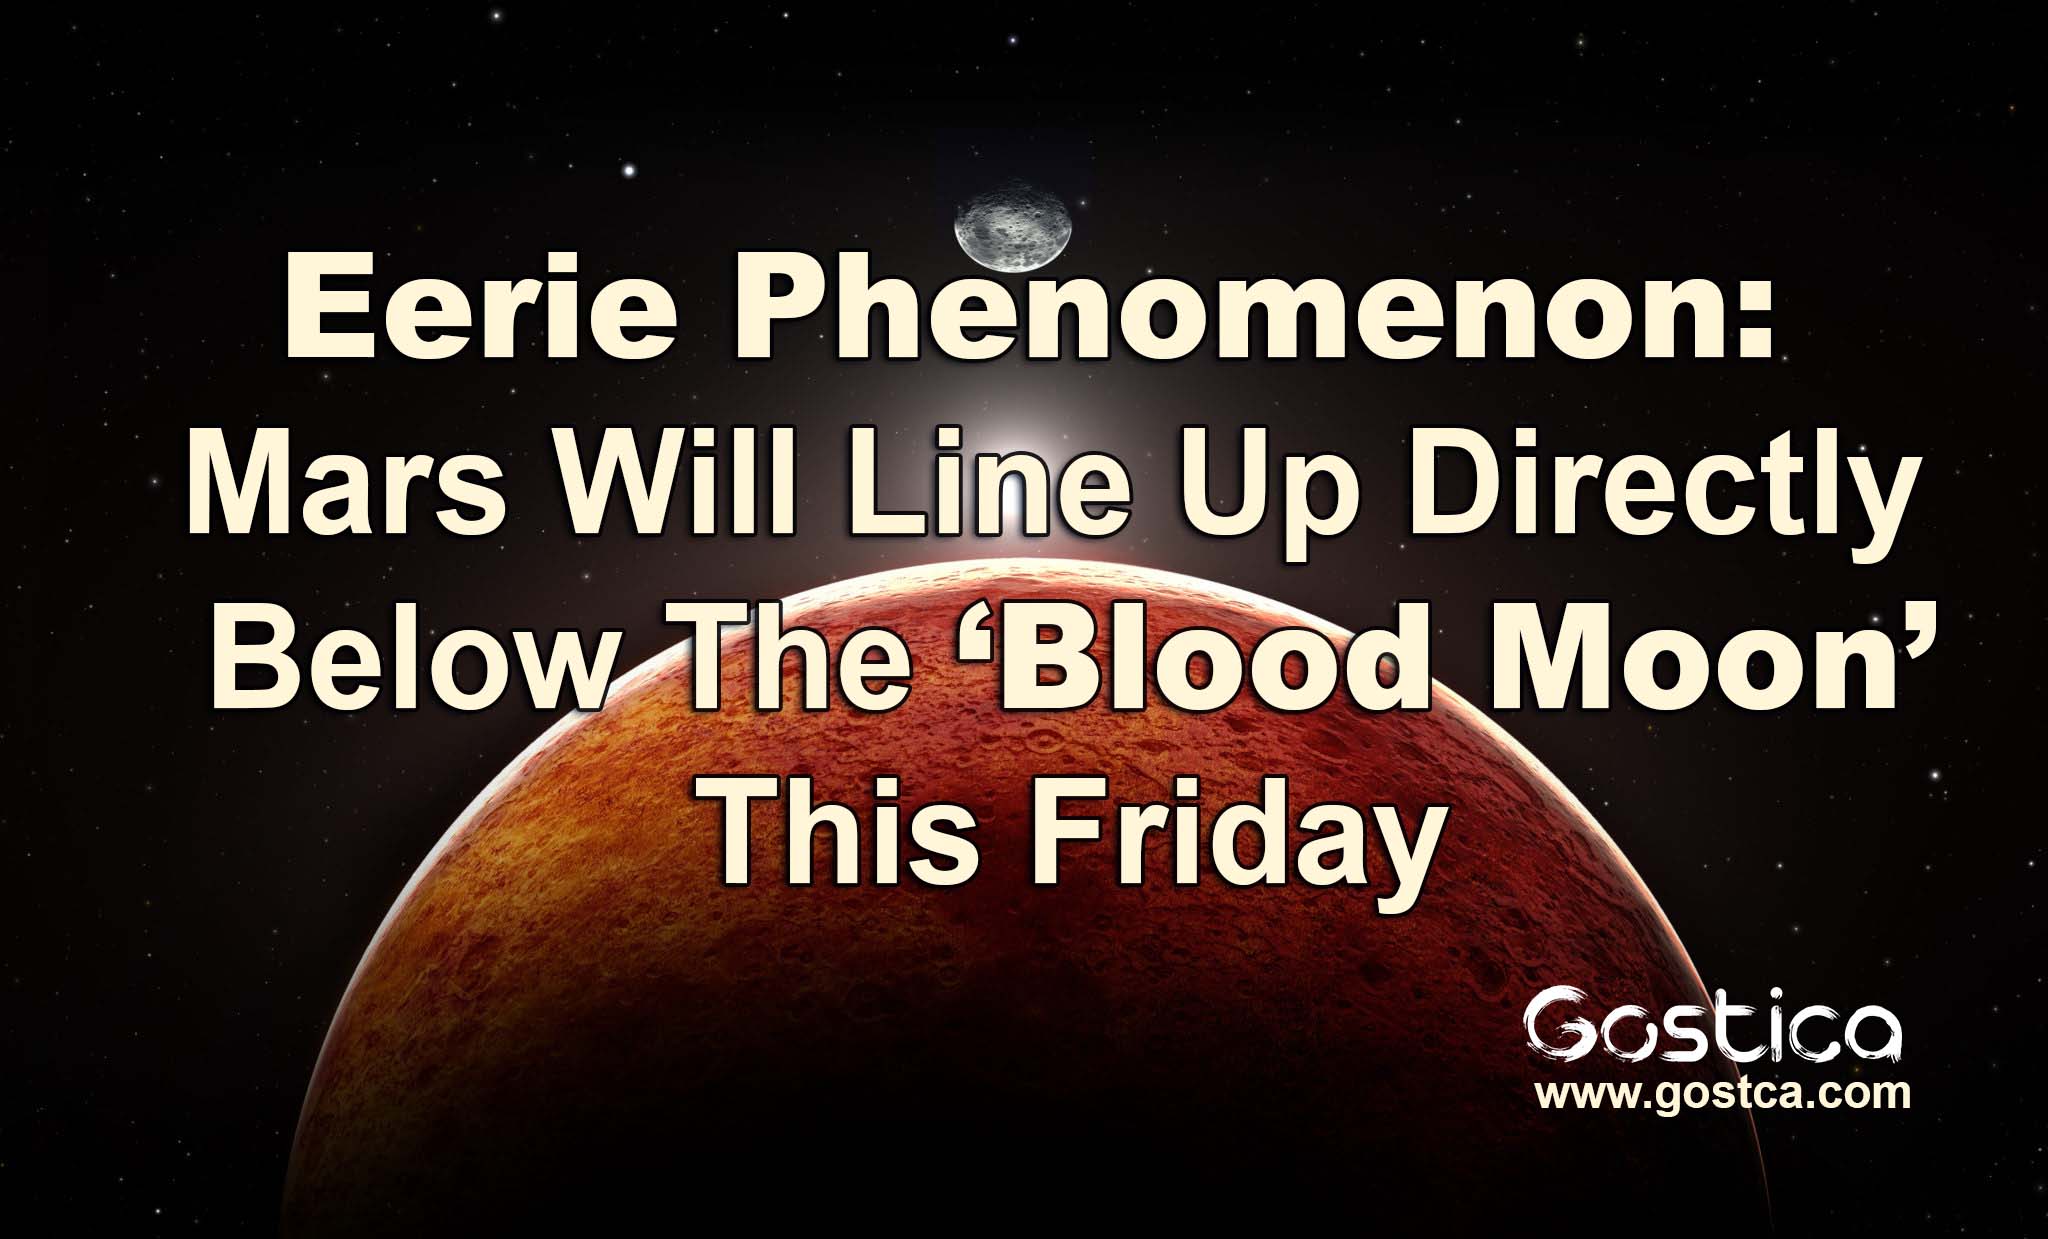 Eerie-Phenomenon-Mars-Will-Line-Up-Directly-Below-The-‘Blood-Moon’-This-Friday.jpg